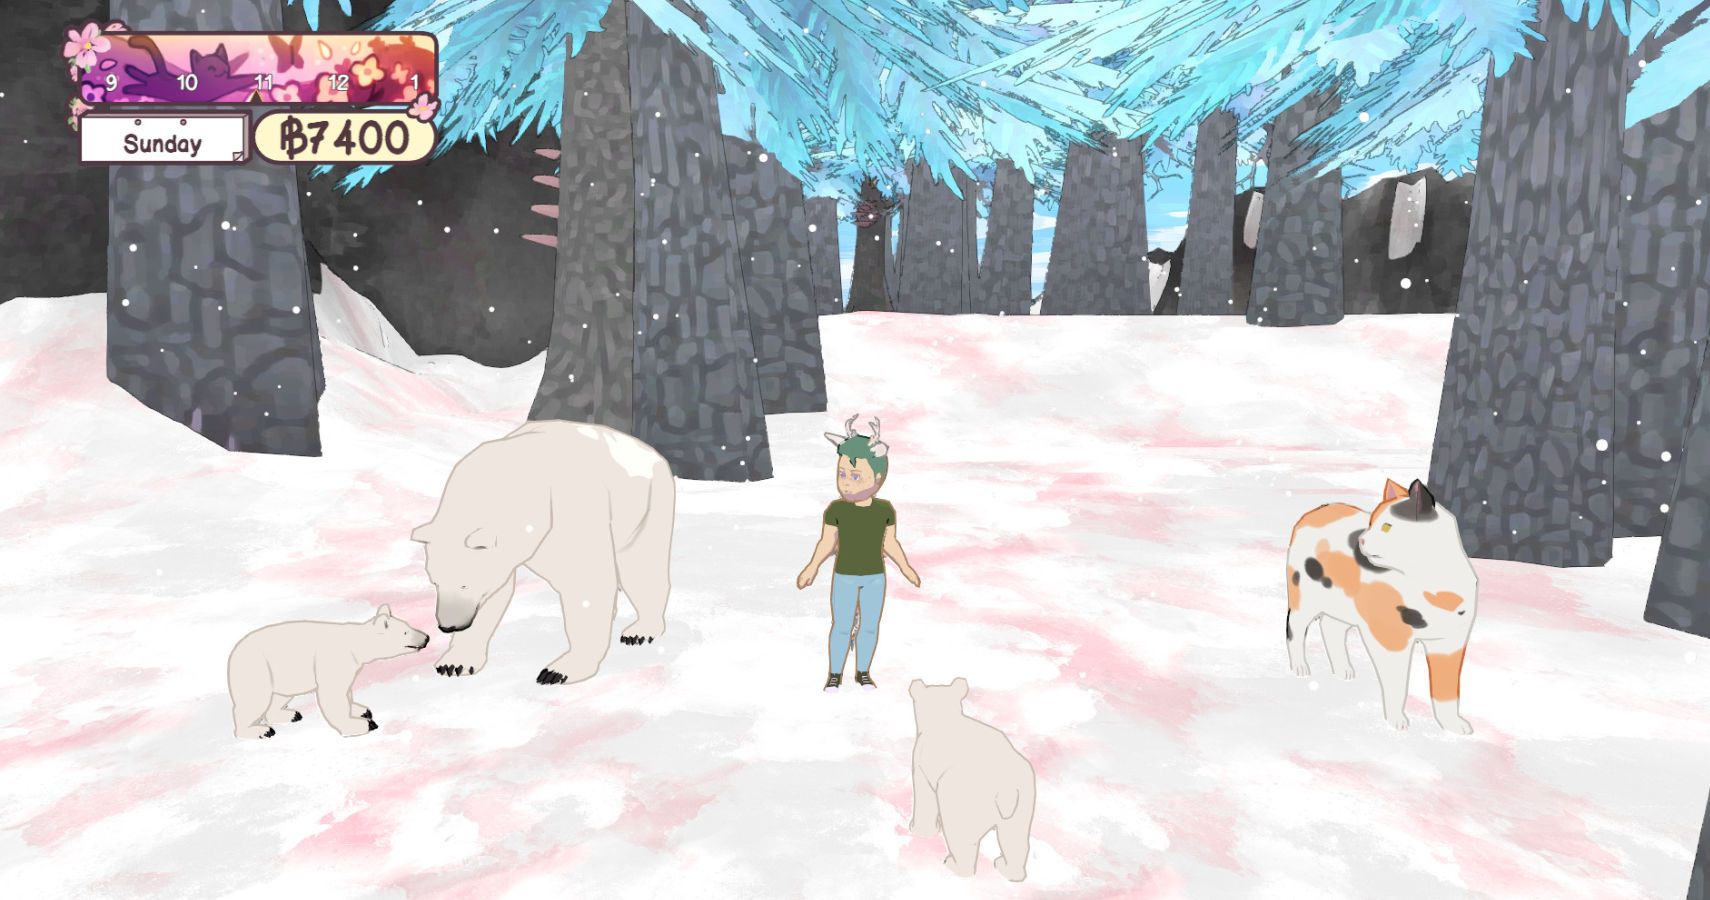 a character in the snow surrounded by polar bears and trees.